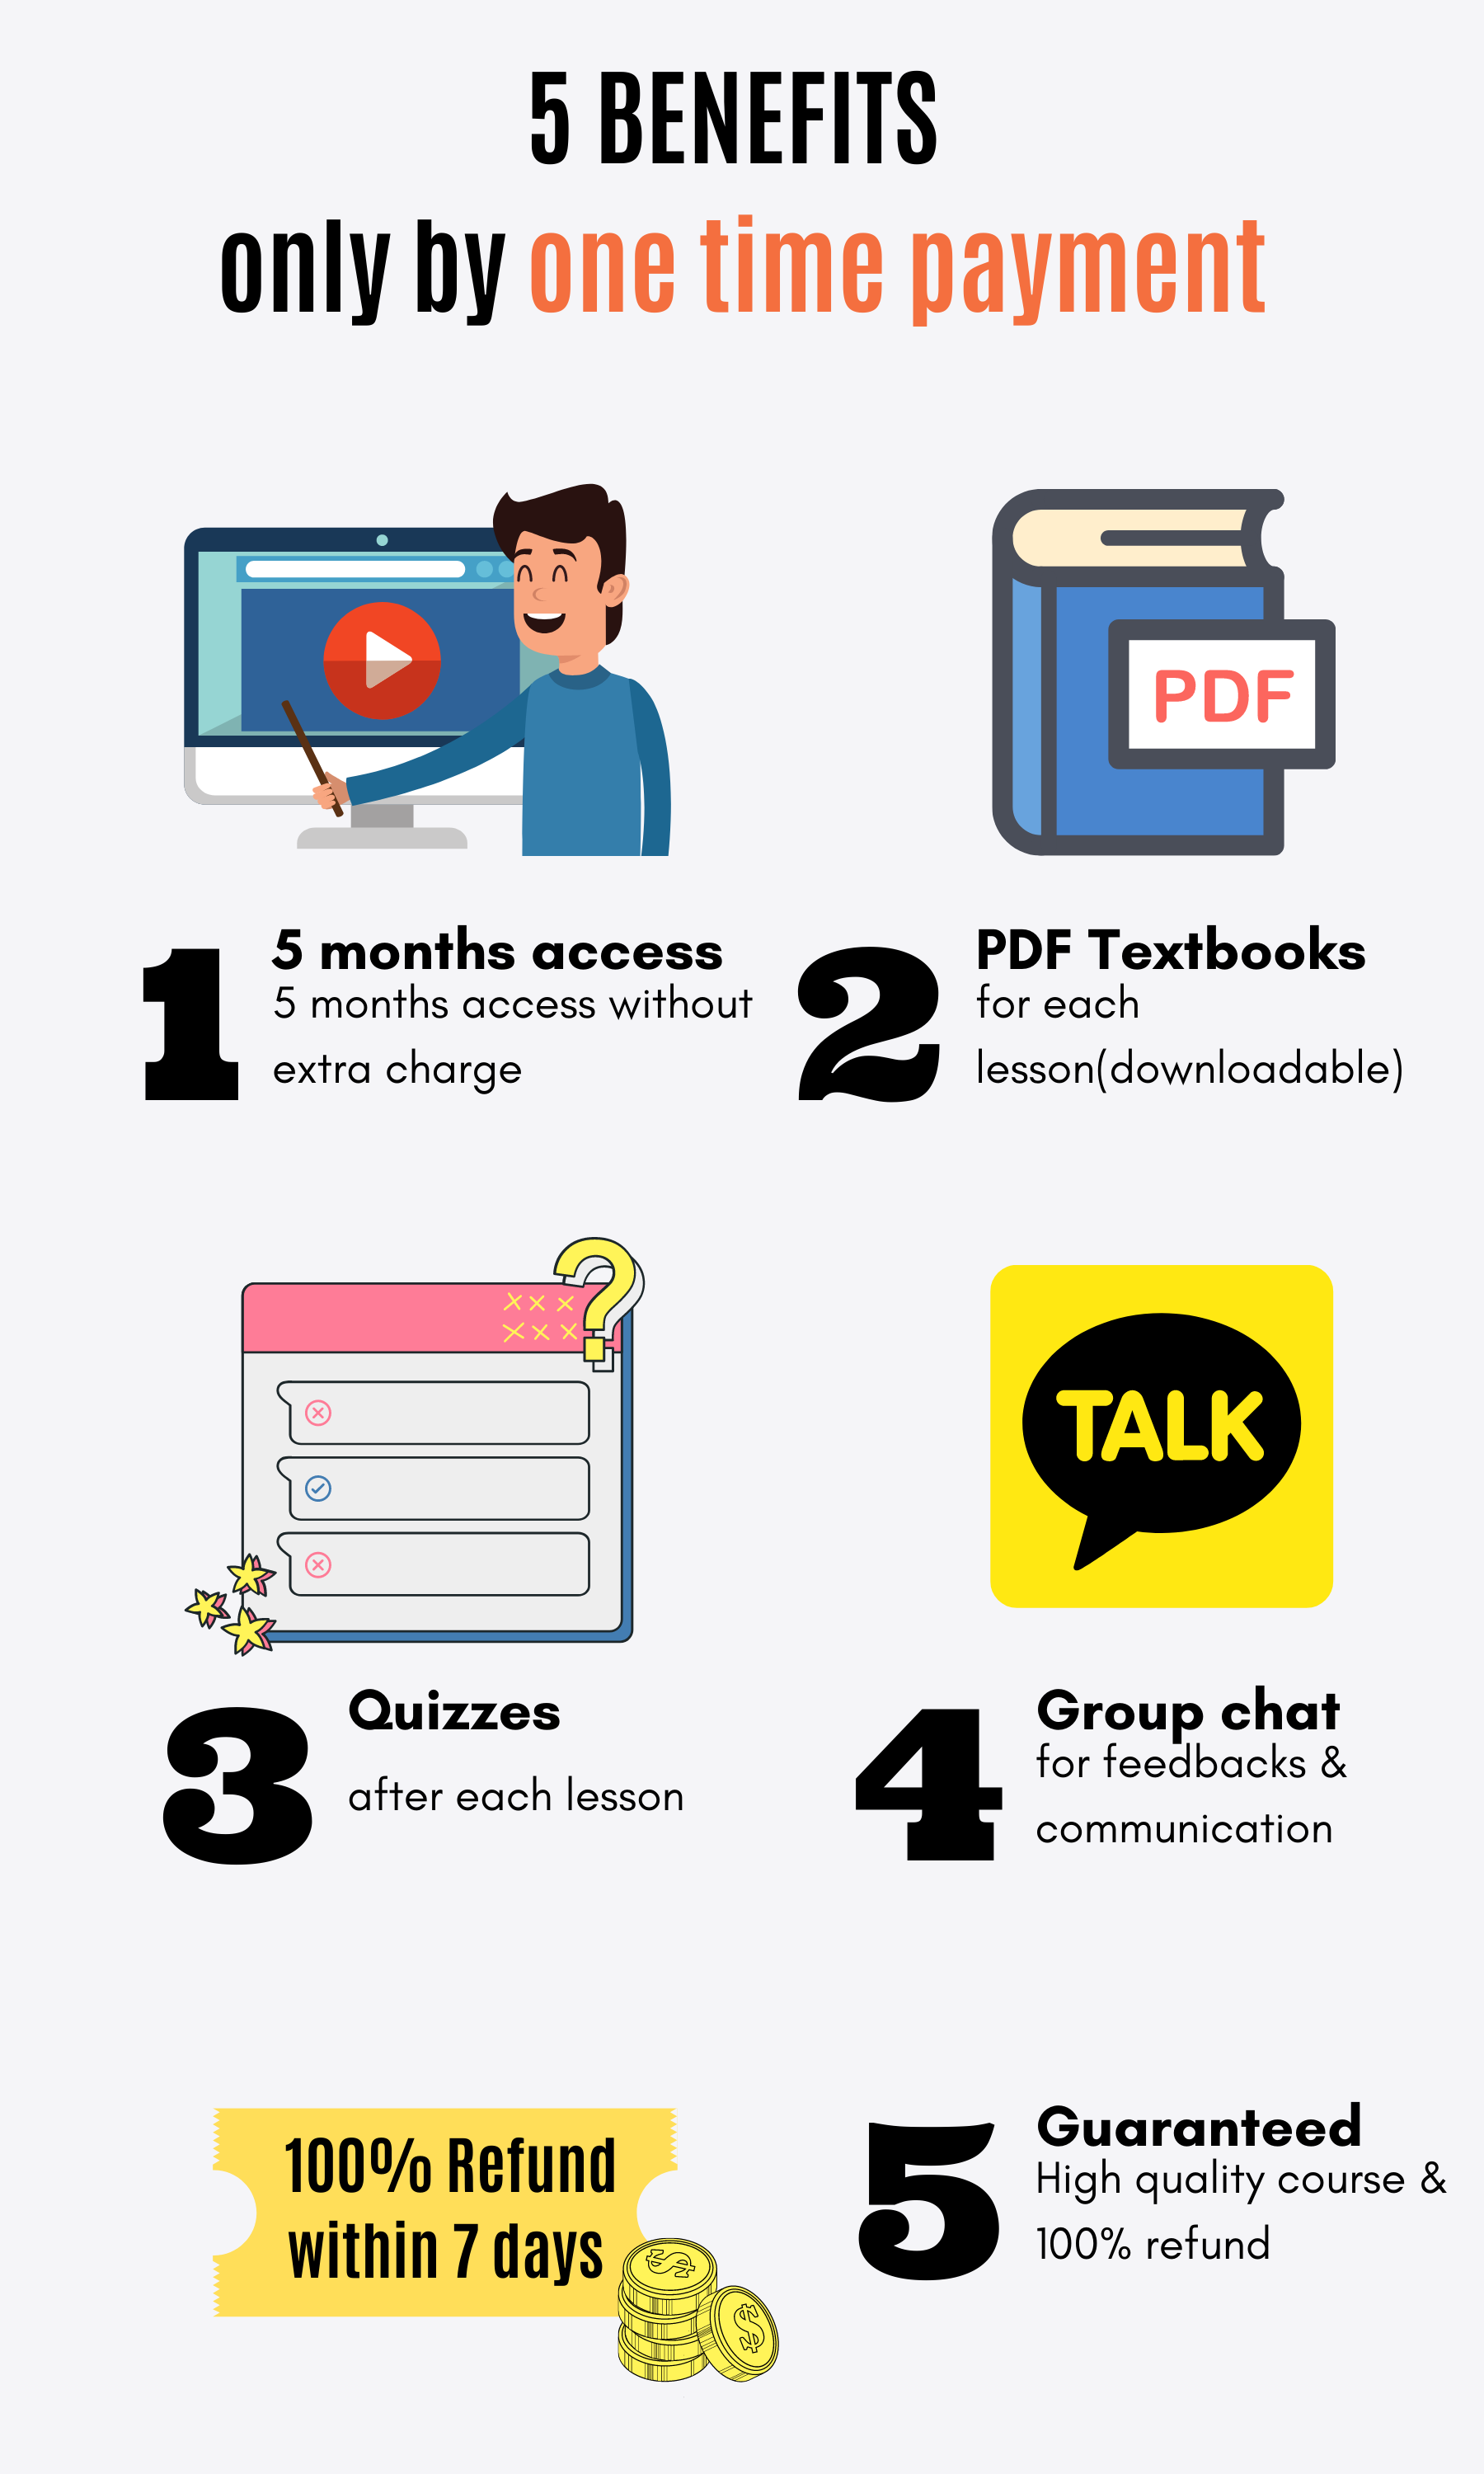 5 benefits only by one time payment - 5 months access without extra charge - Free Korean PDF downloadable textbooks for each lesson - quizzes after each lesson - Group chat for Korean learners to get feedbacks and communication - high quality Korean course and 100% refund